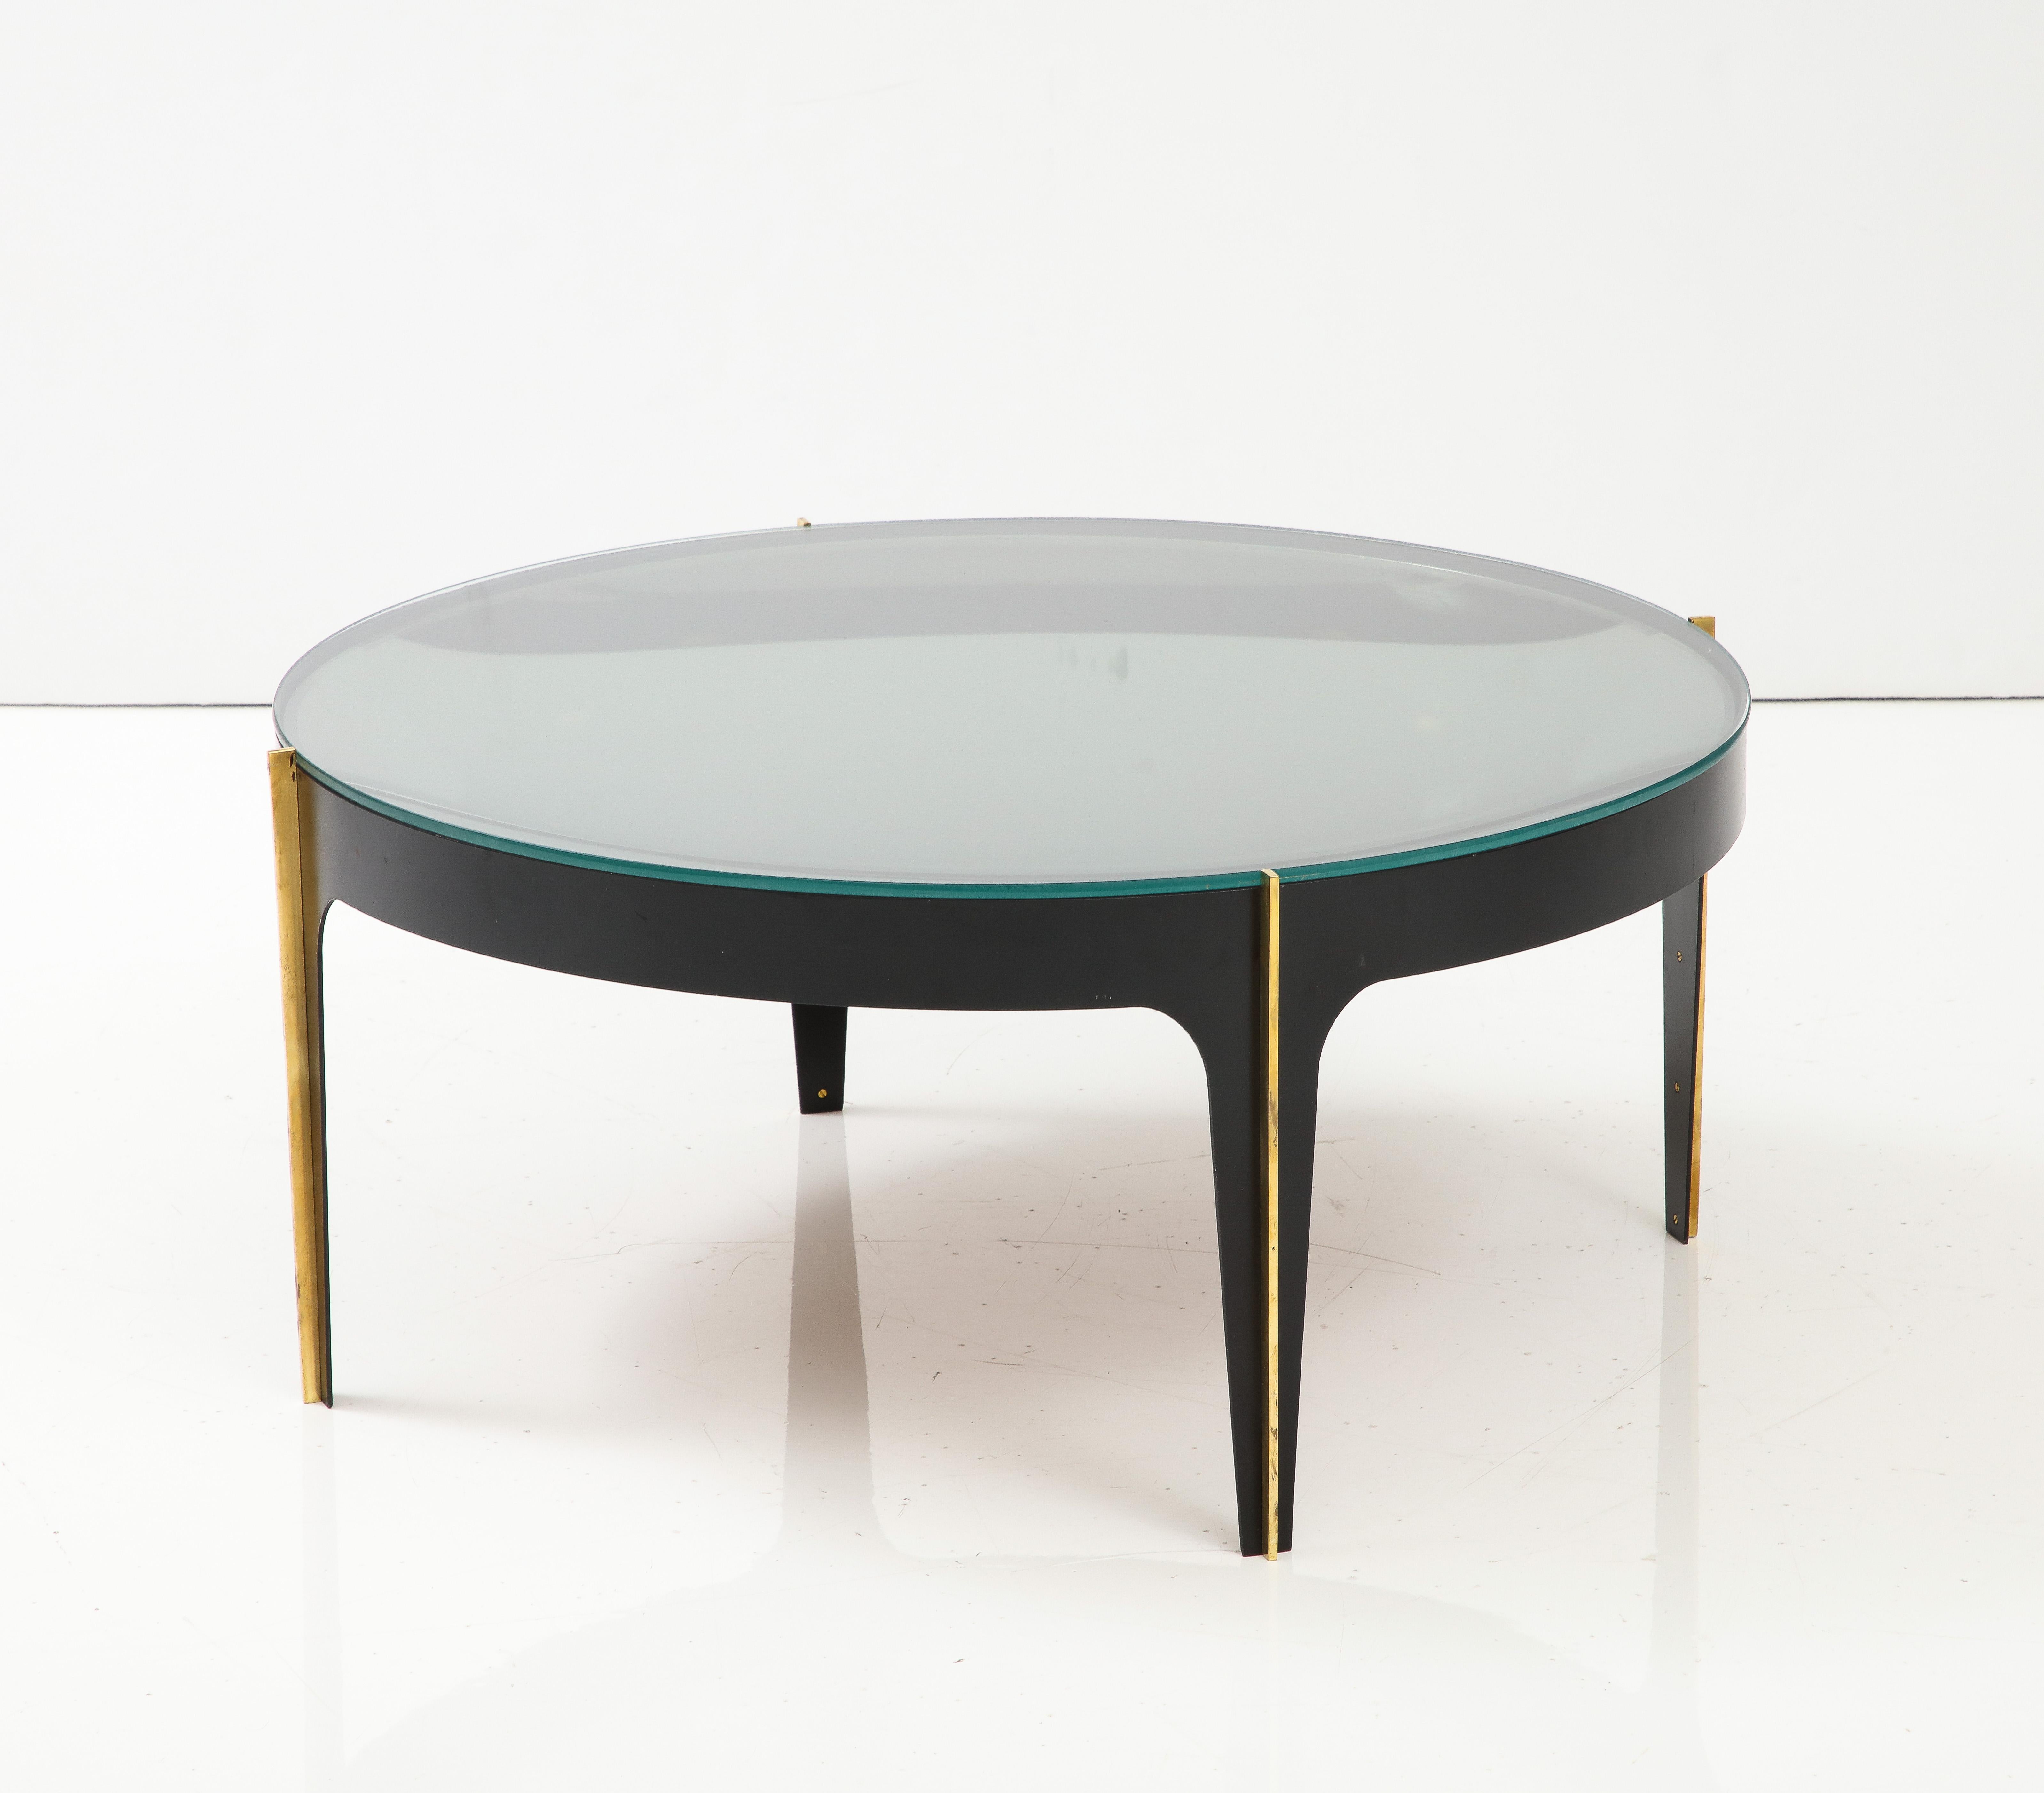 Round Cocktail Table in Black Enameled Metal, Brass and Green Grey Optical Glass For Sale 2